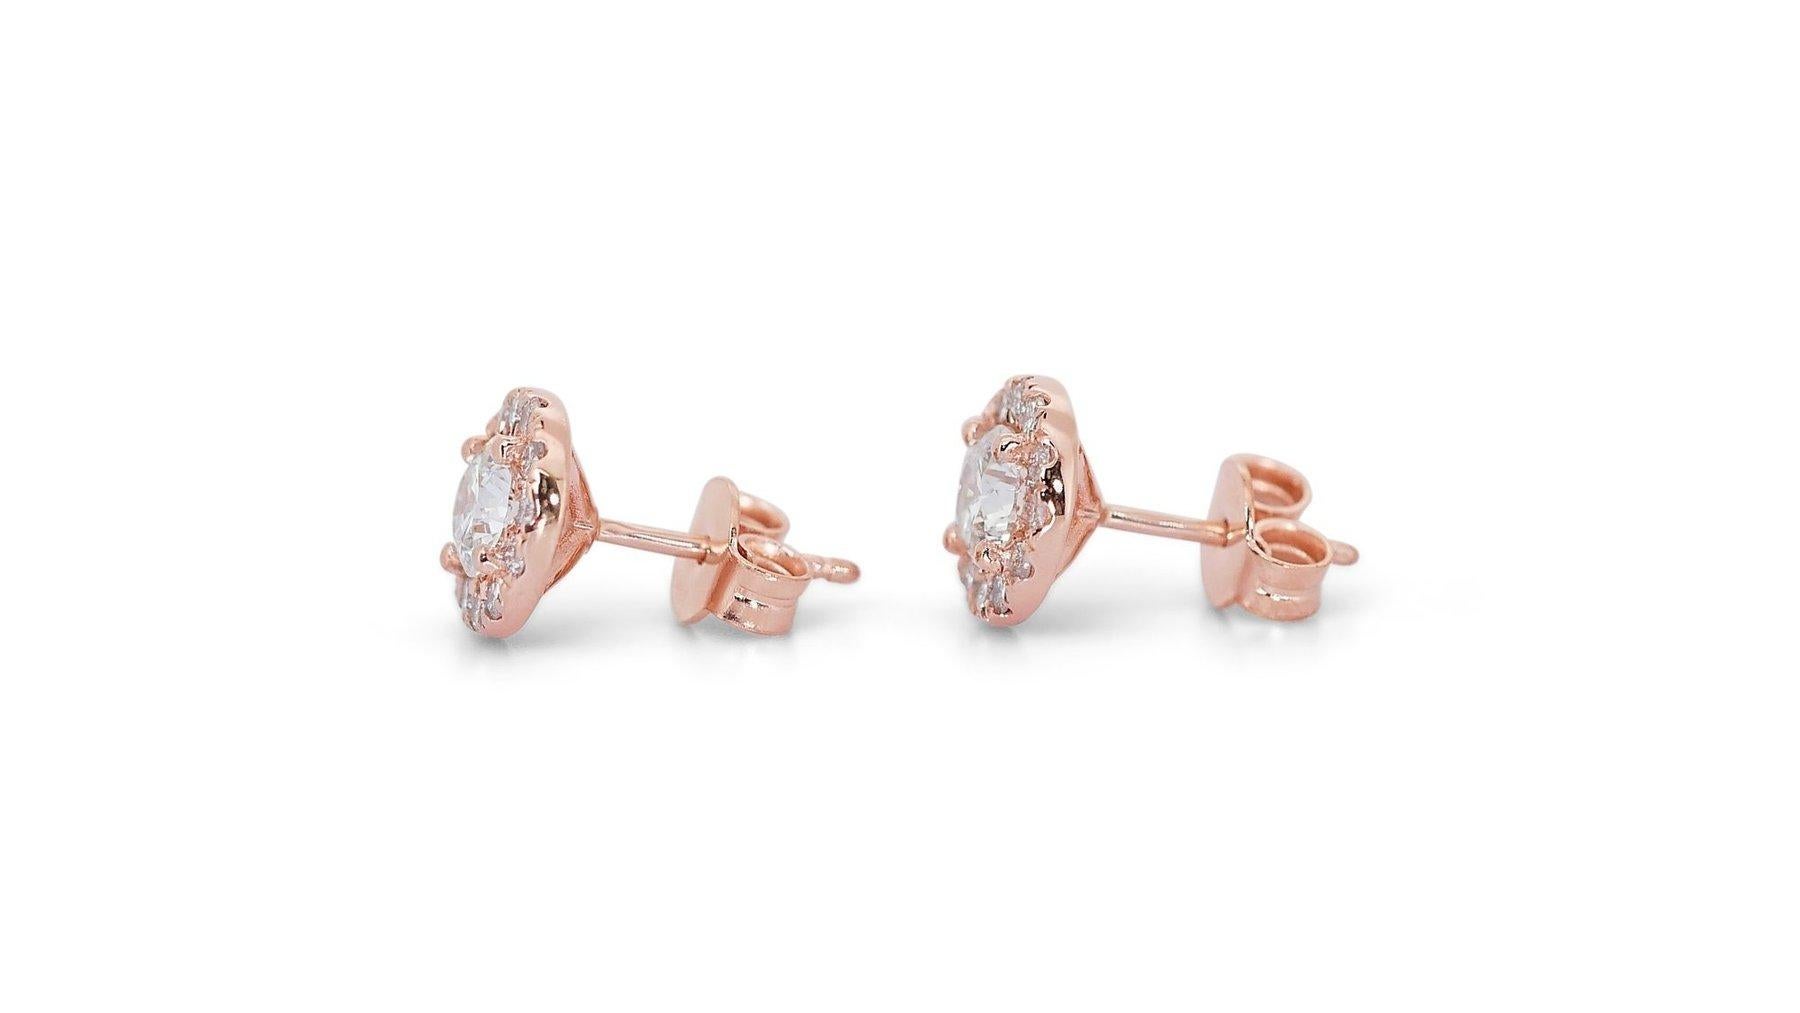 Sophisticated 2.31ct Diamonds Halo Stud Earrings in 18k Rose Gold - GIA  For Sale 1